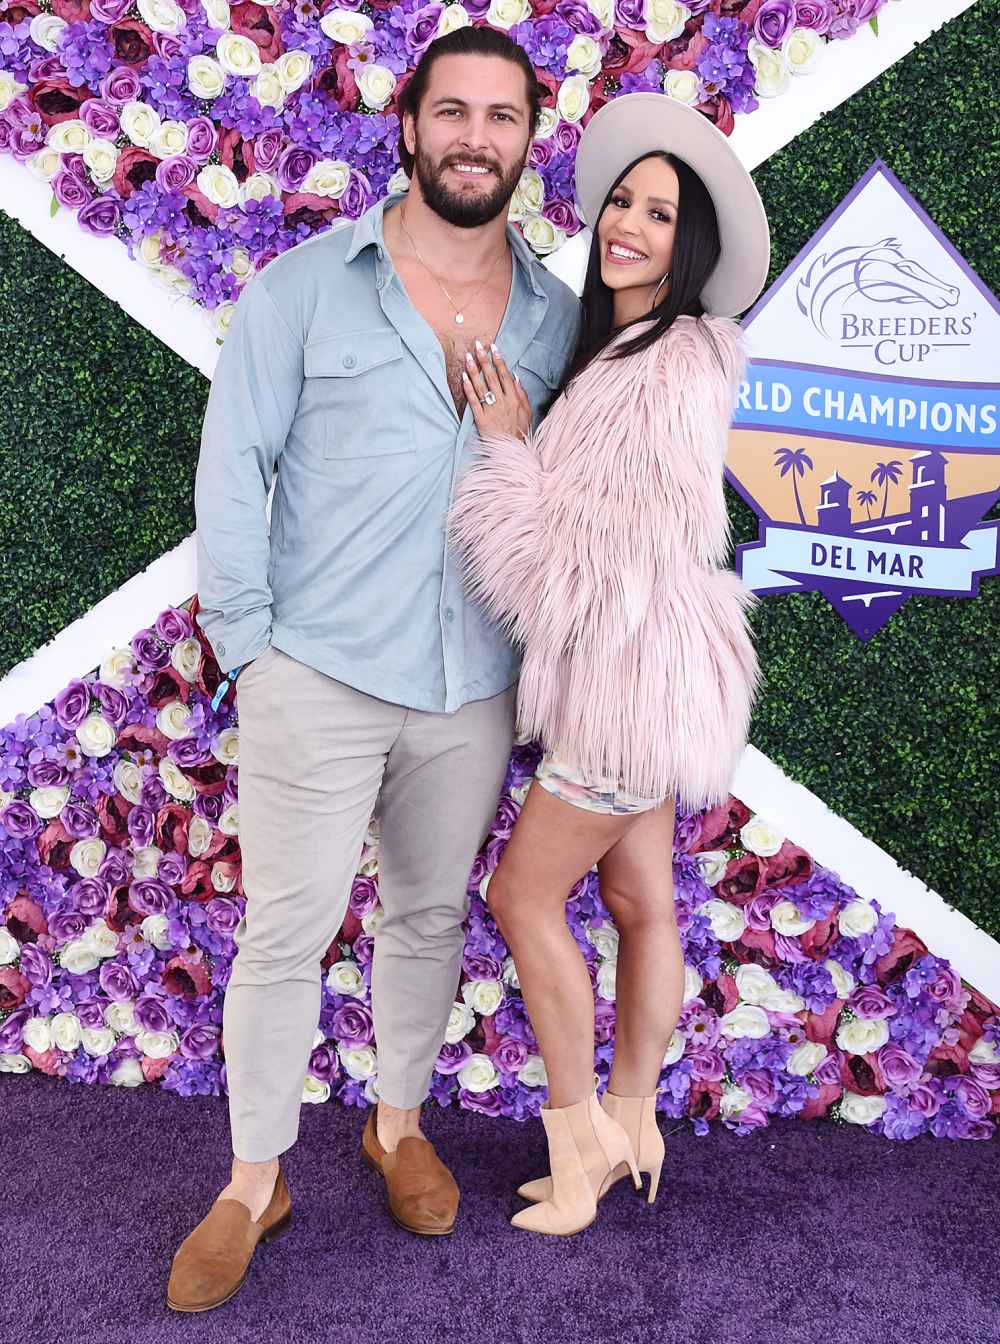 Vanderpump Rules' Scheana Shay Defends Morganite Engagement Ring From Brock Davies: ‘I Didn’t Want a Diamond’